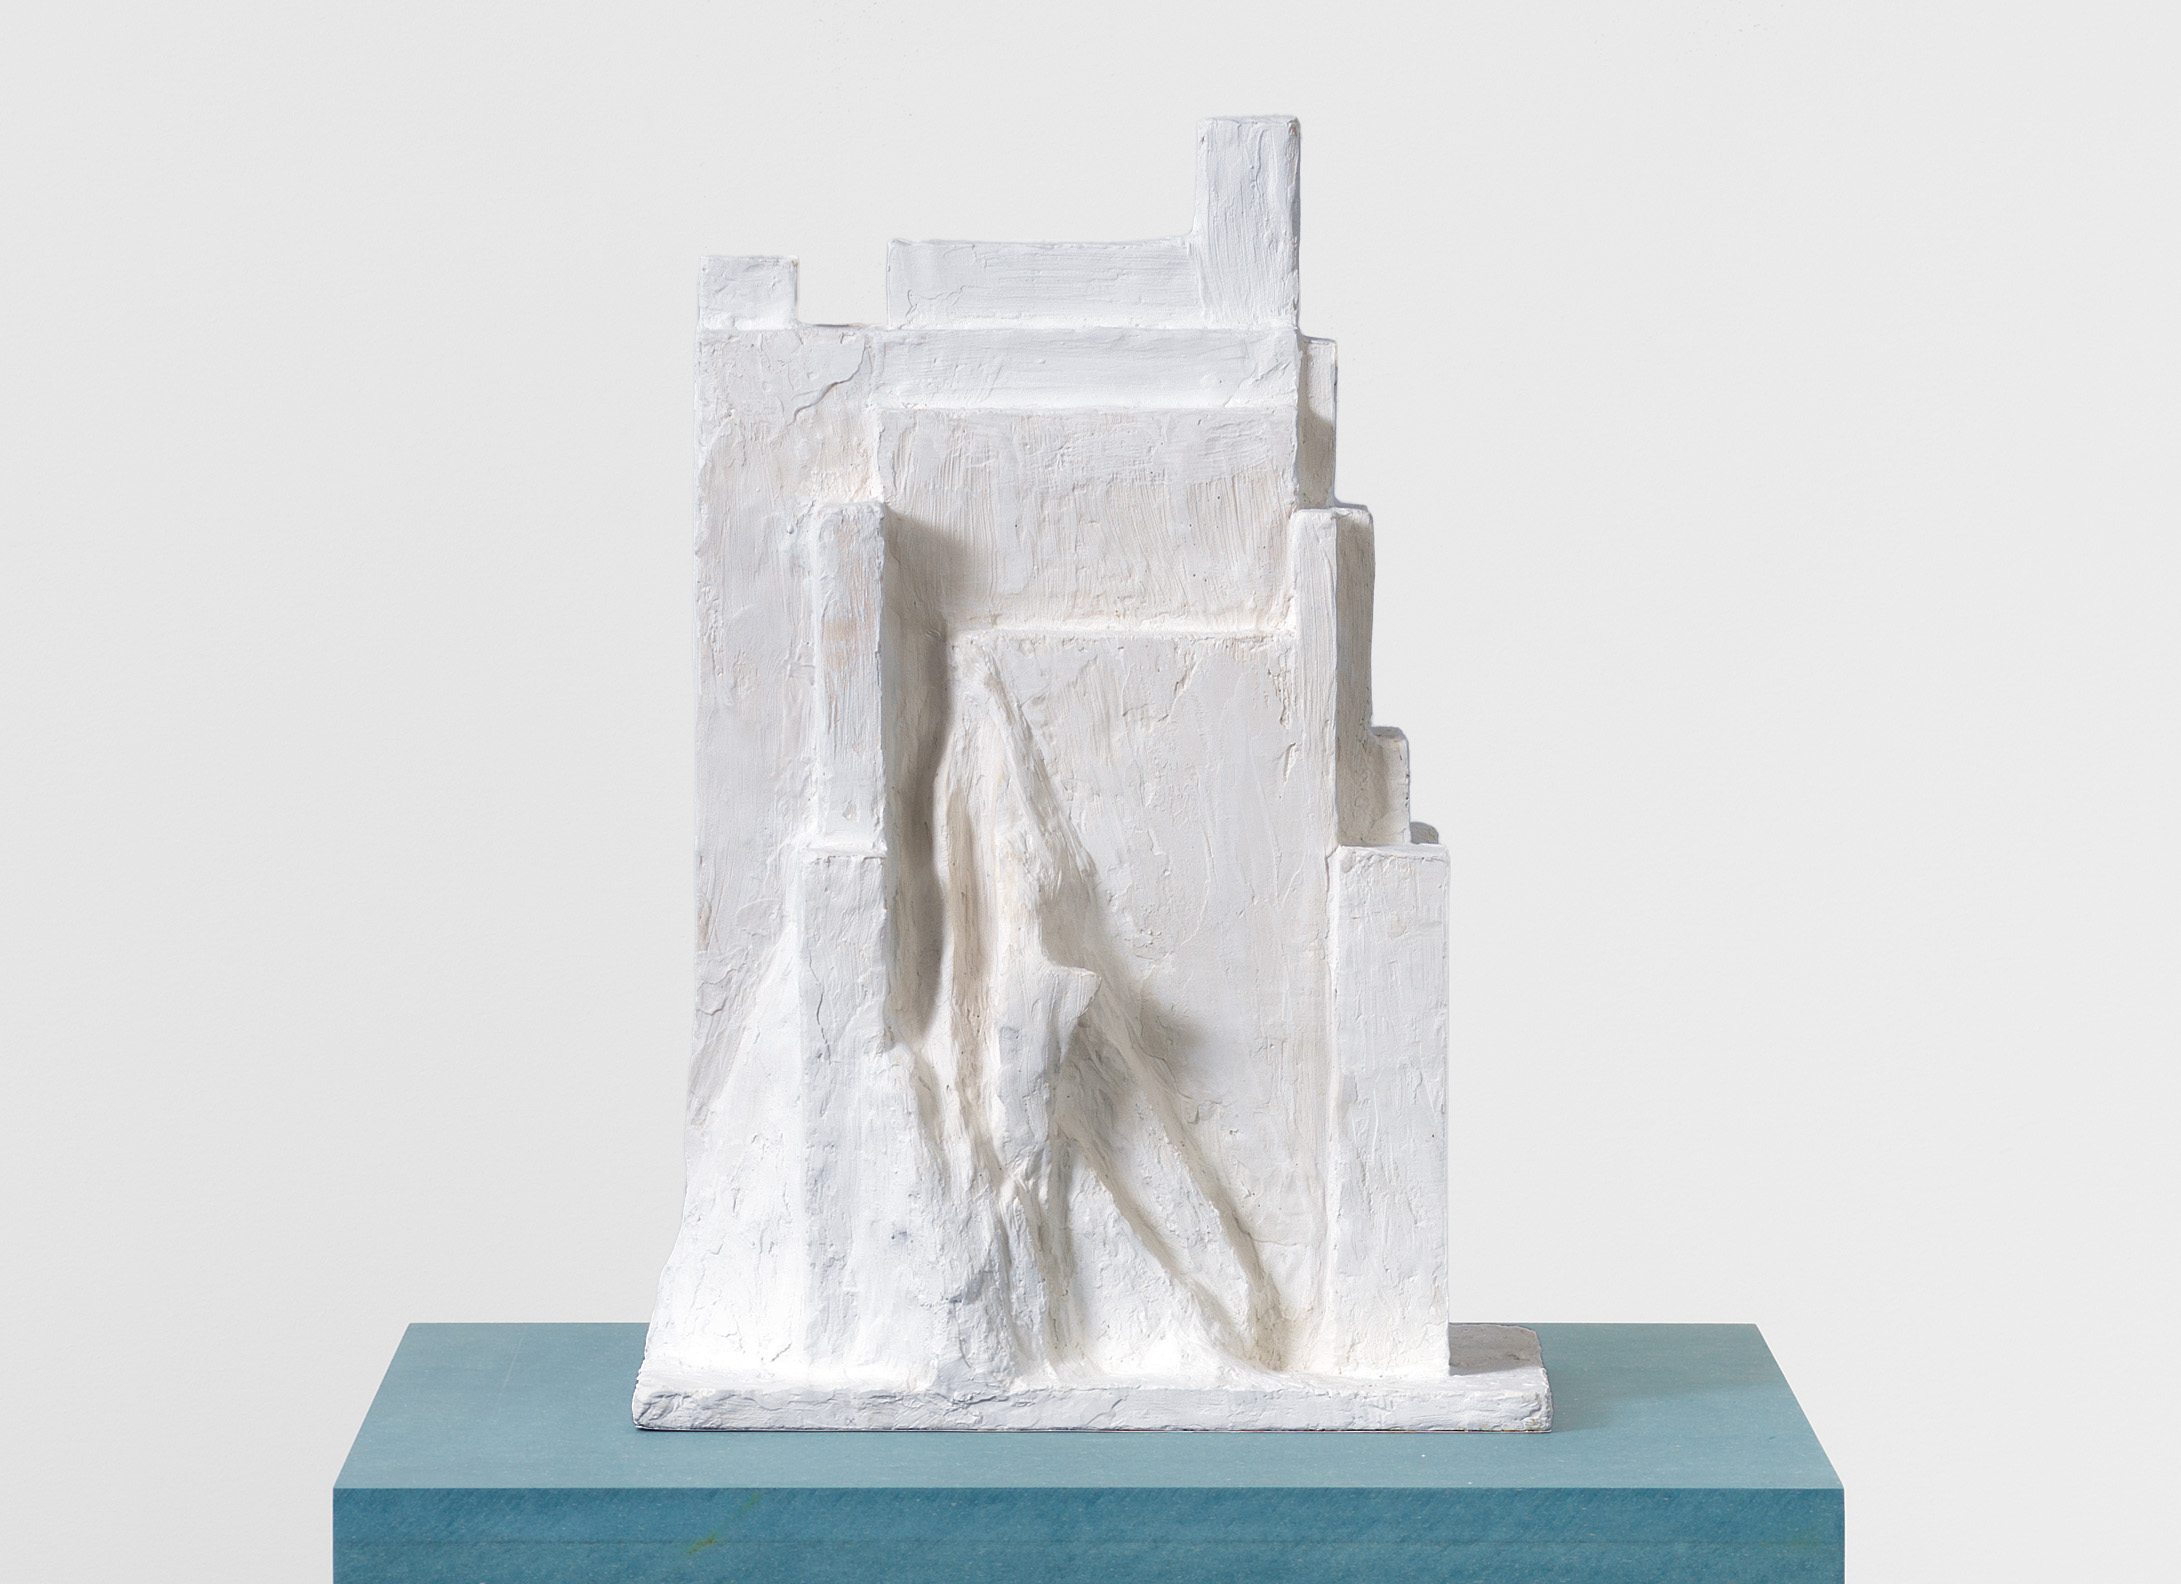 Jennifer Bolande, Drift 4, 2023, Plaster, wood, wire mesh on blue pigmented high-density composite plinth and base, 63 1/4 x 20 x 20 in.